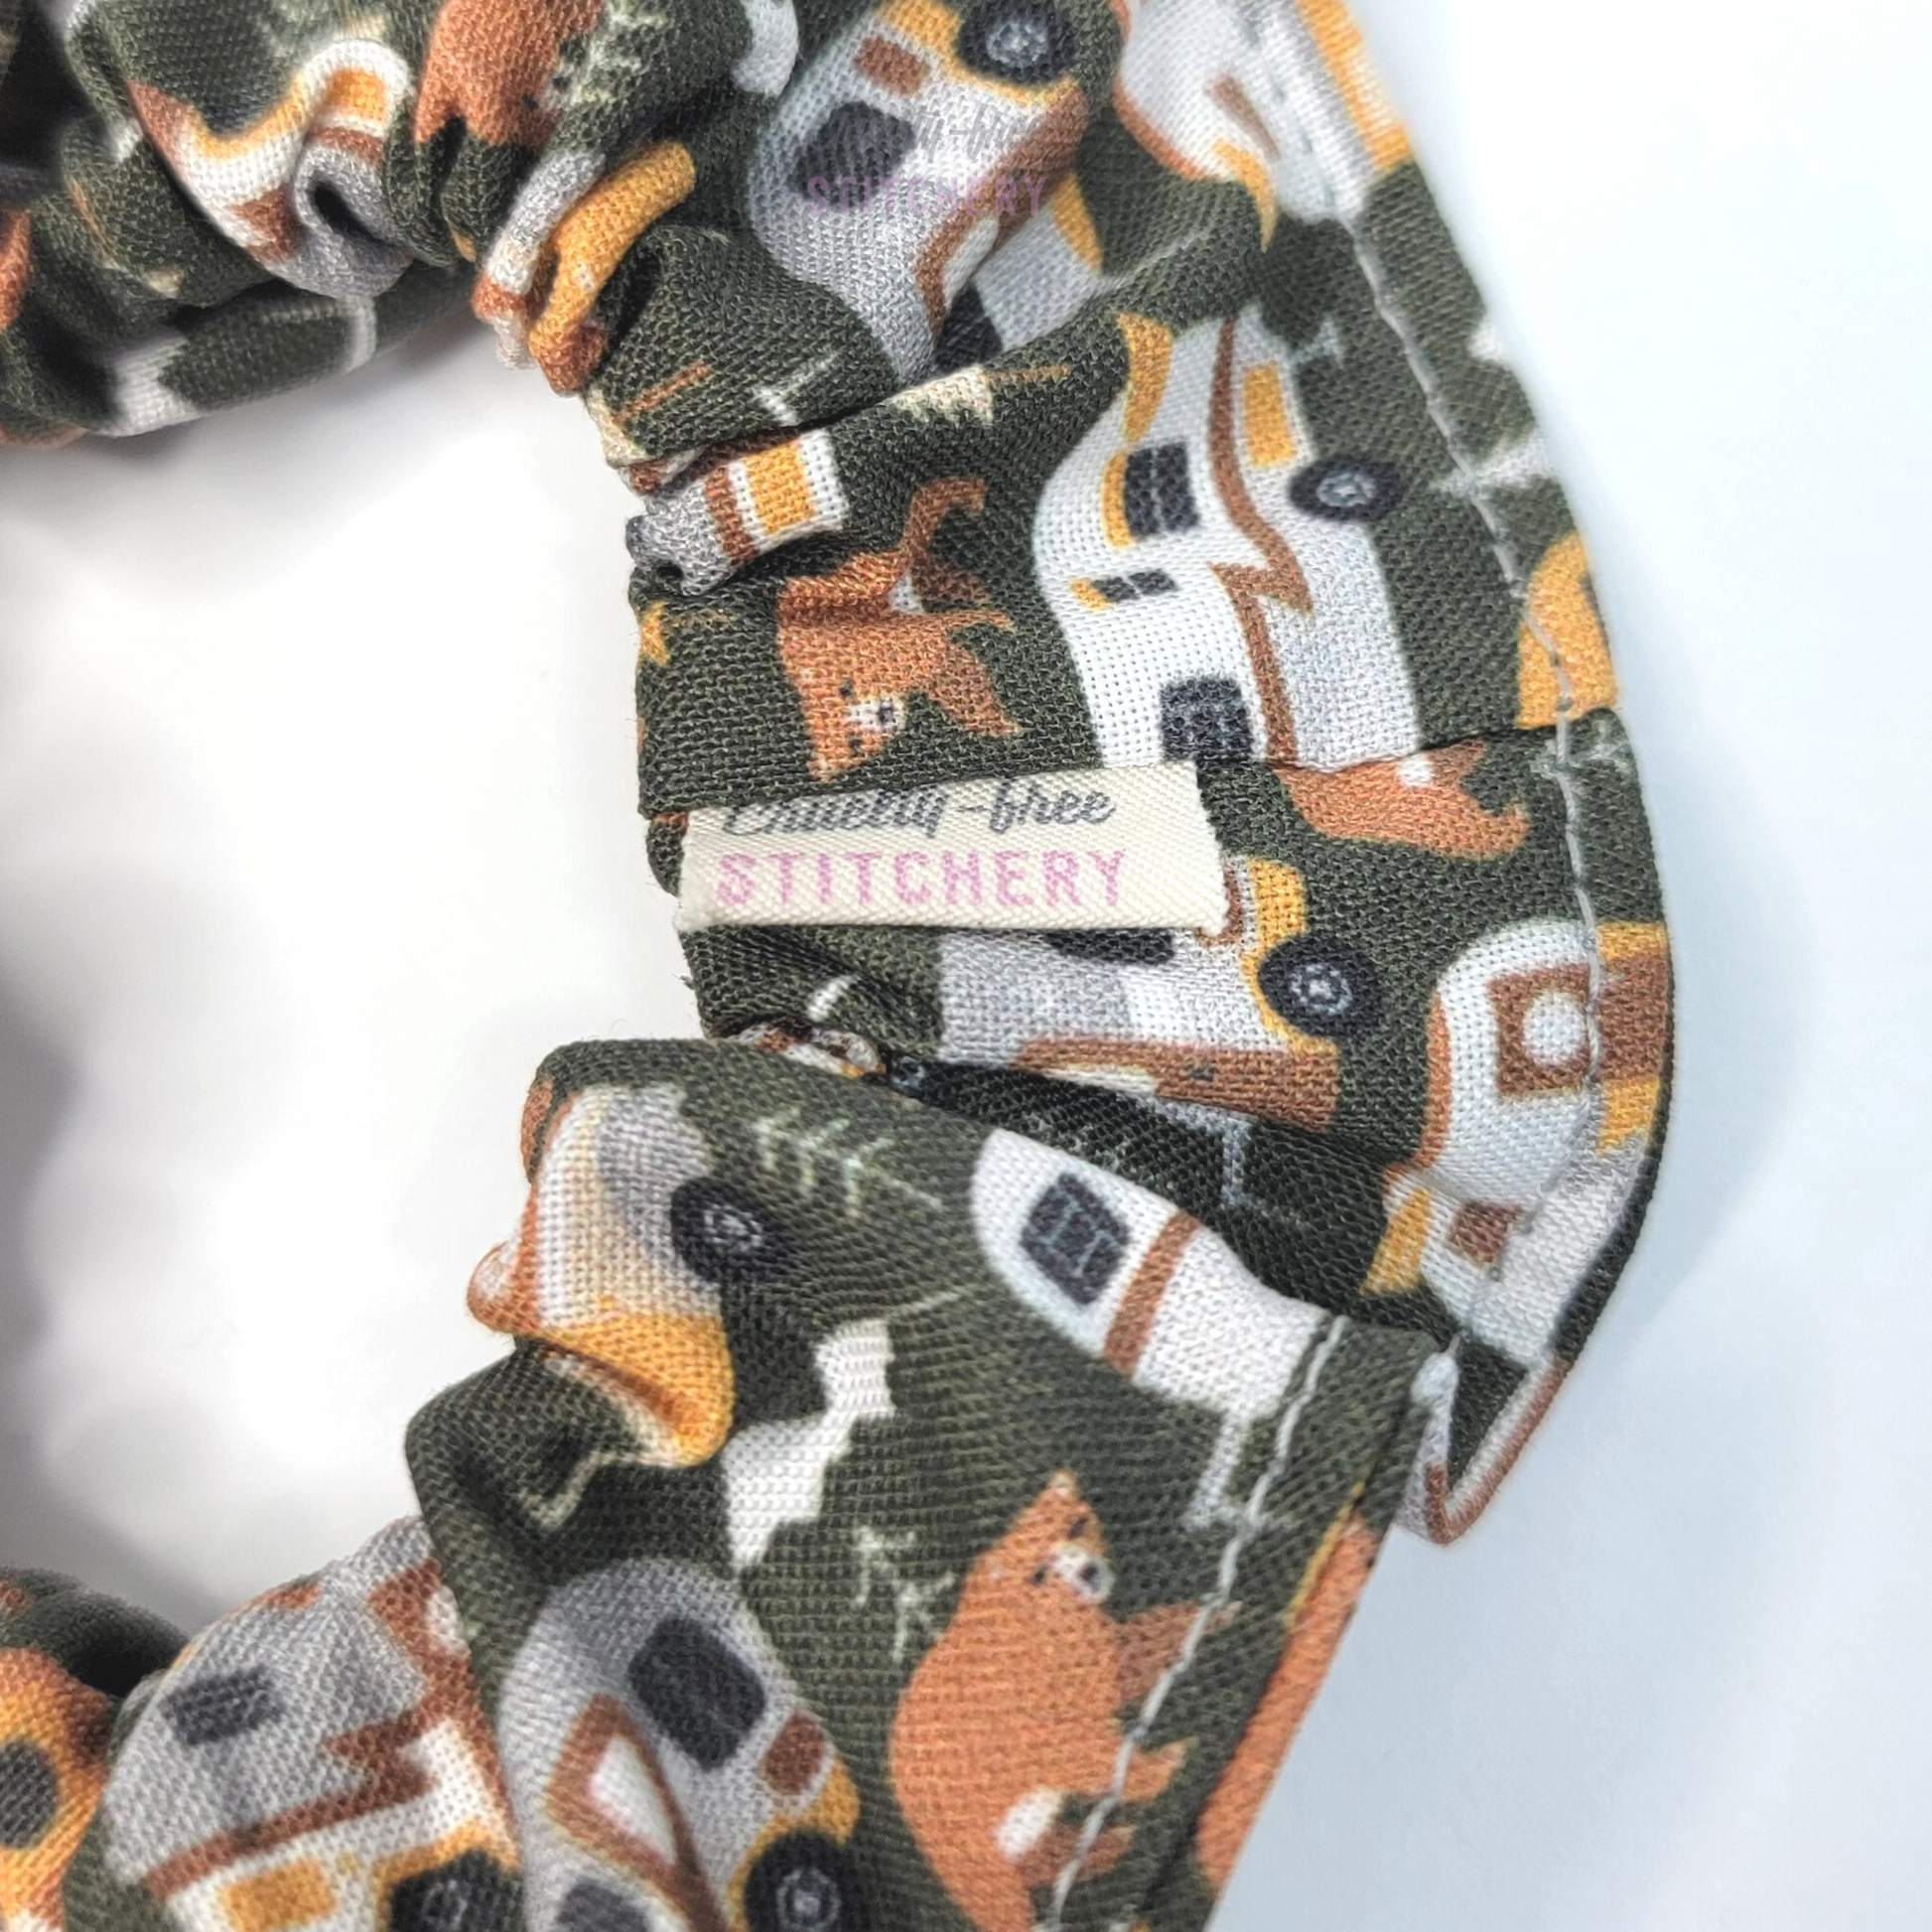 Close-up of the dark green scrunchie with bears, trees, and vintage campers. A small white tag has the Cruelty-Free Stitchery logo.